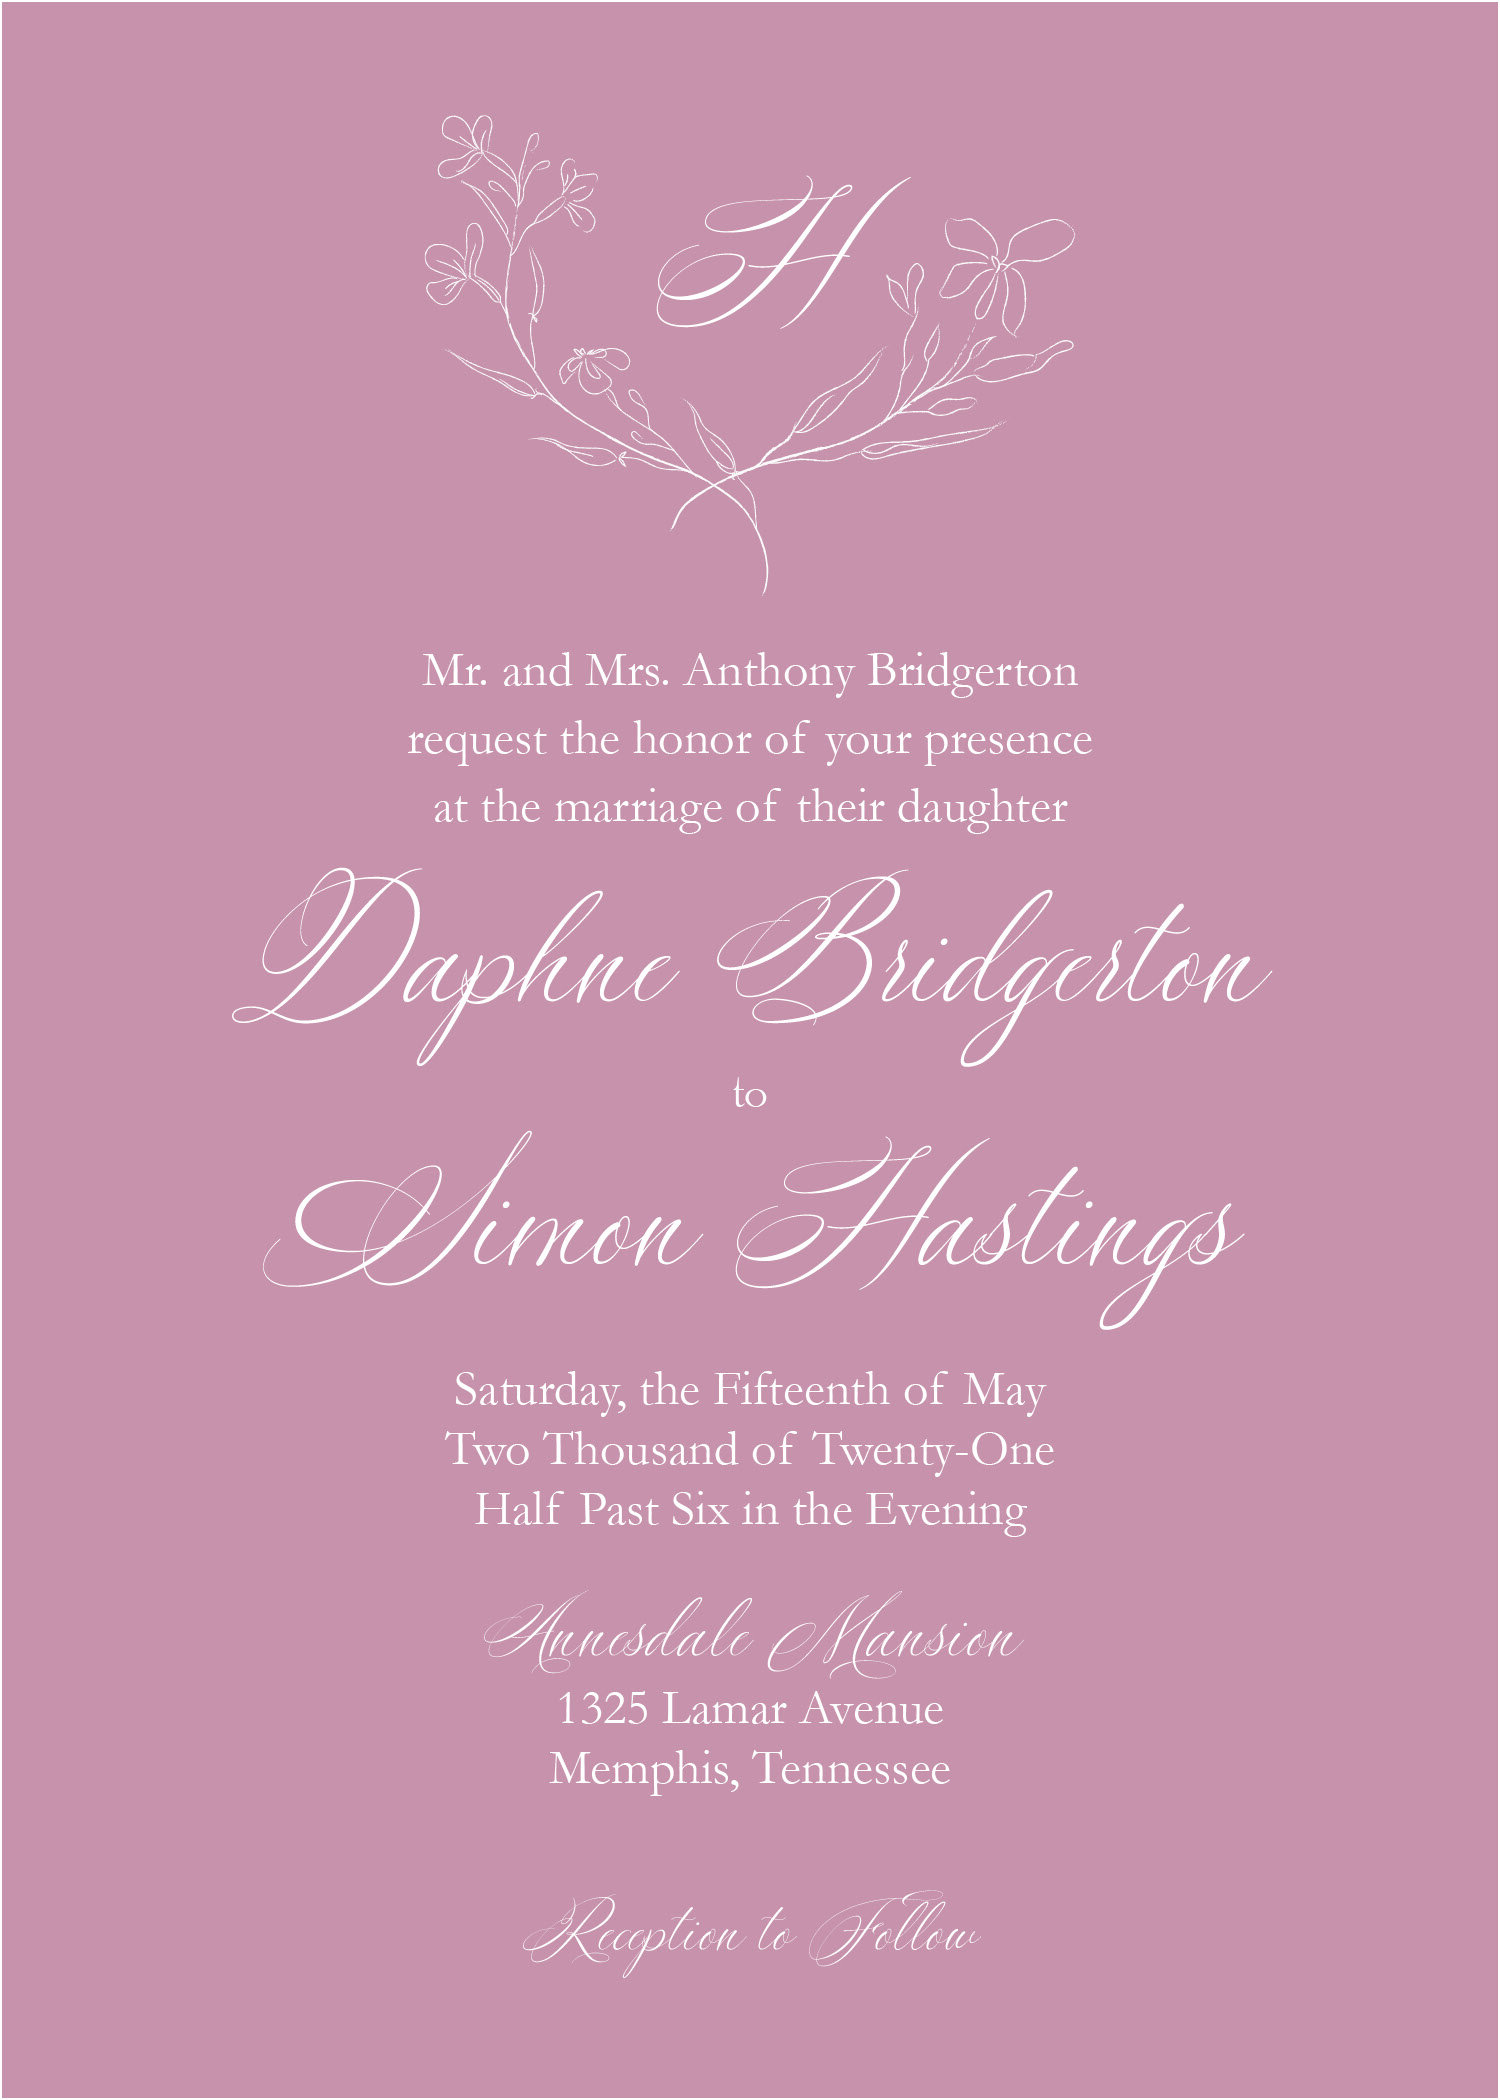 Bride's Parents Hosting - Font Combo #5 and #18